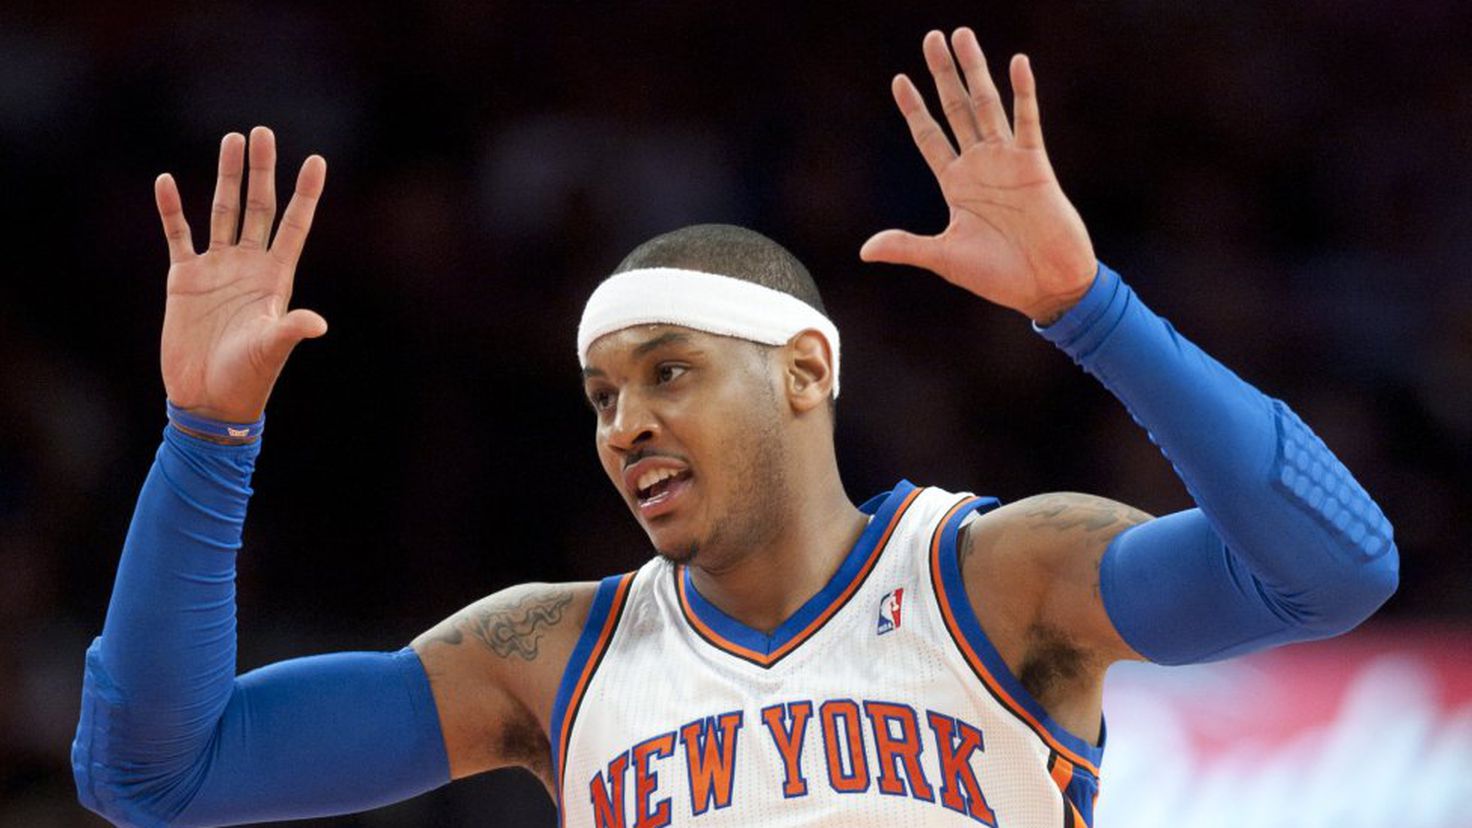 Farewell to a legend: Carmelo Anthony announces his retirement
